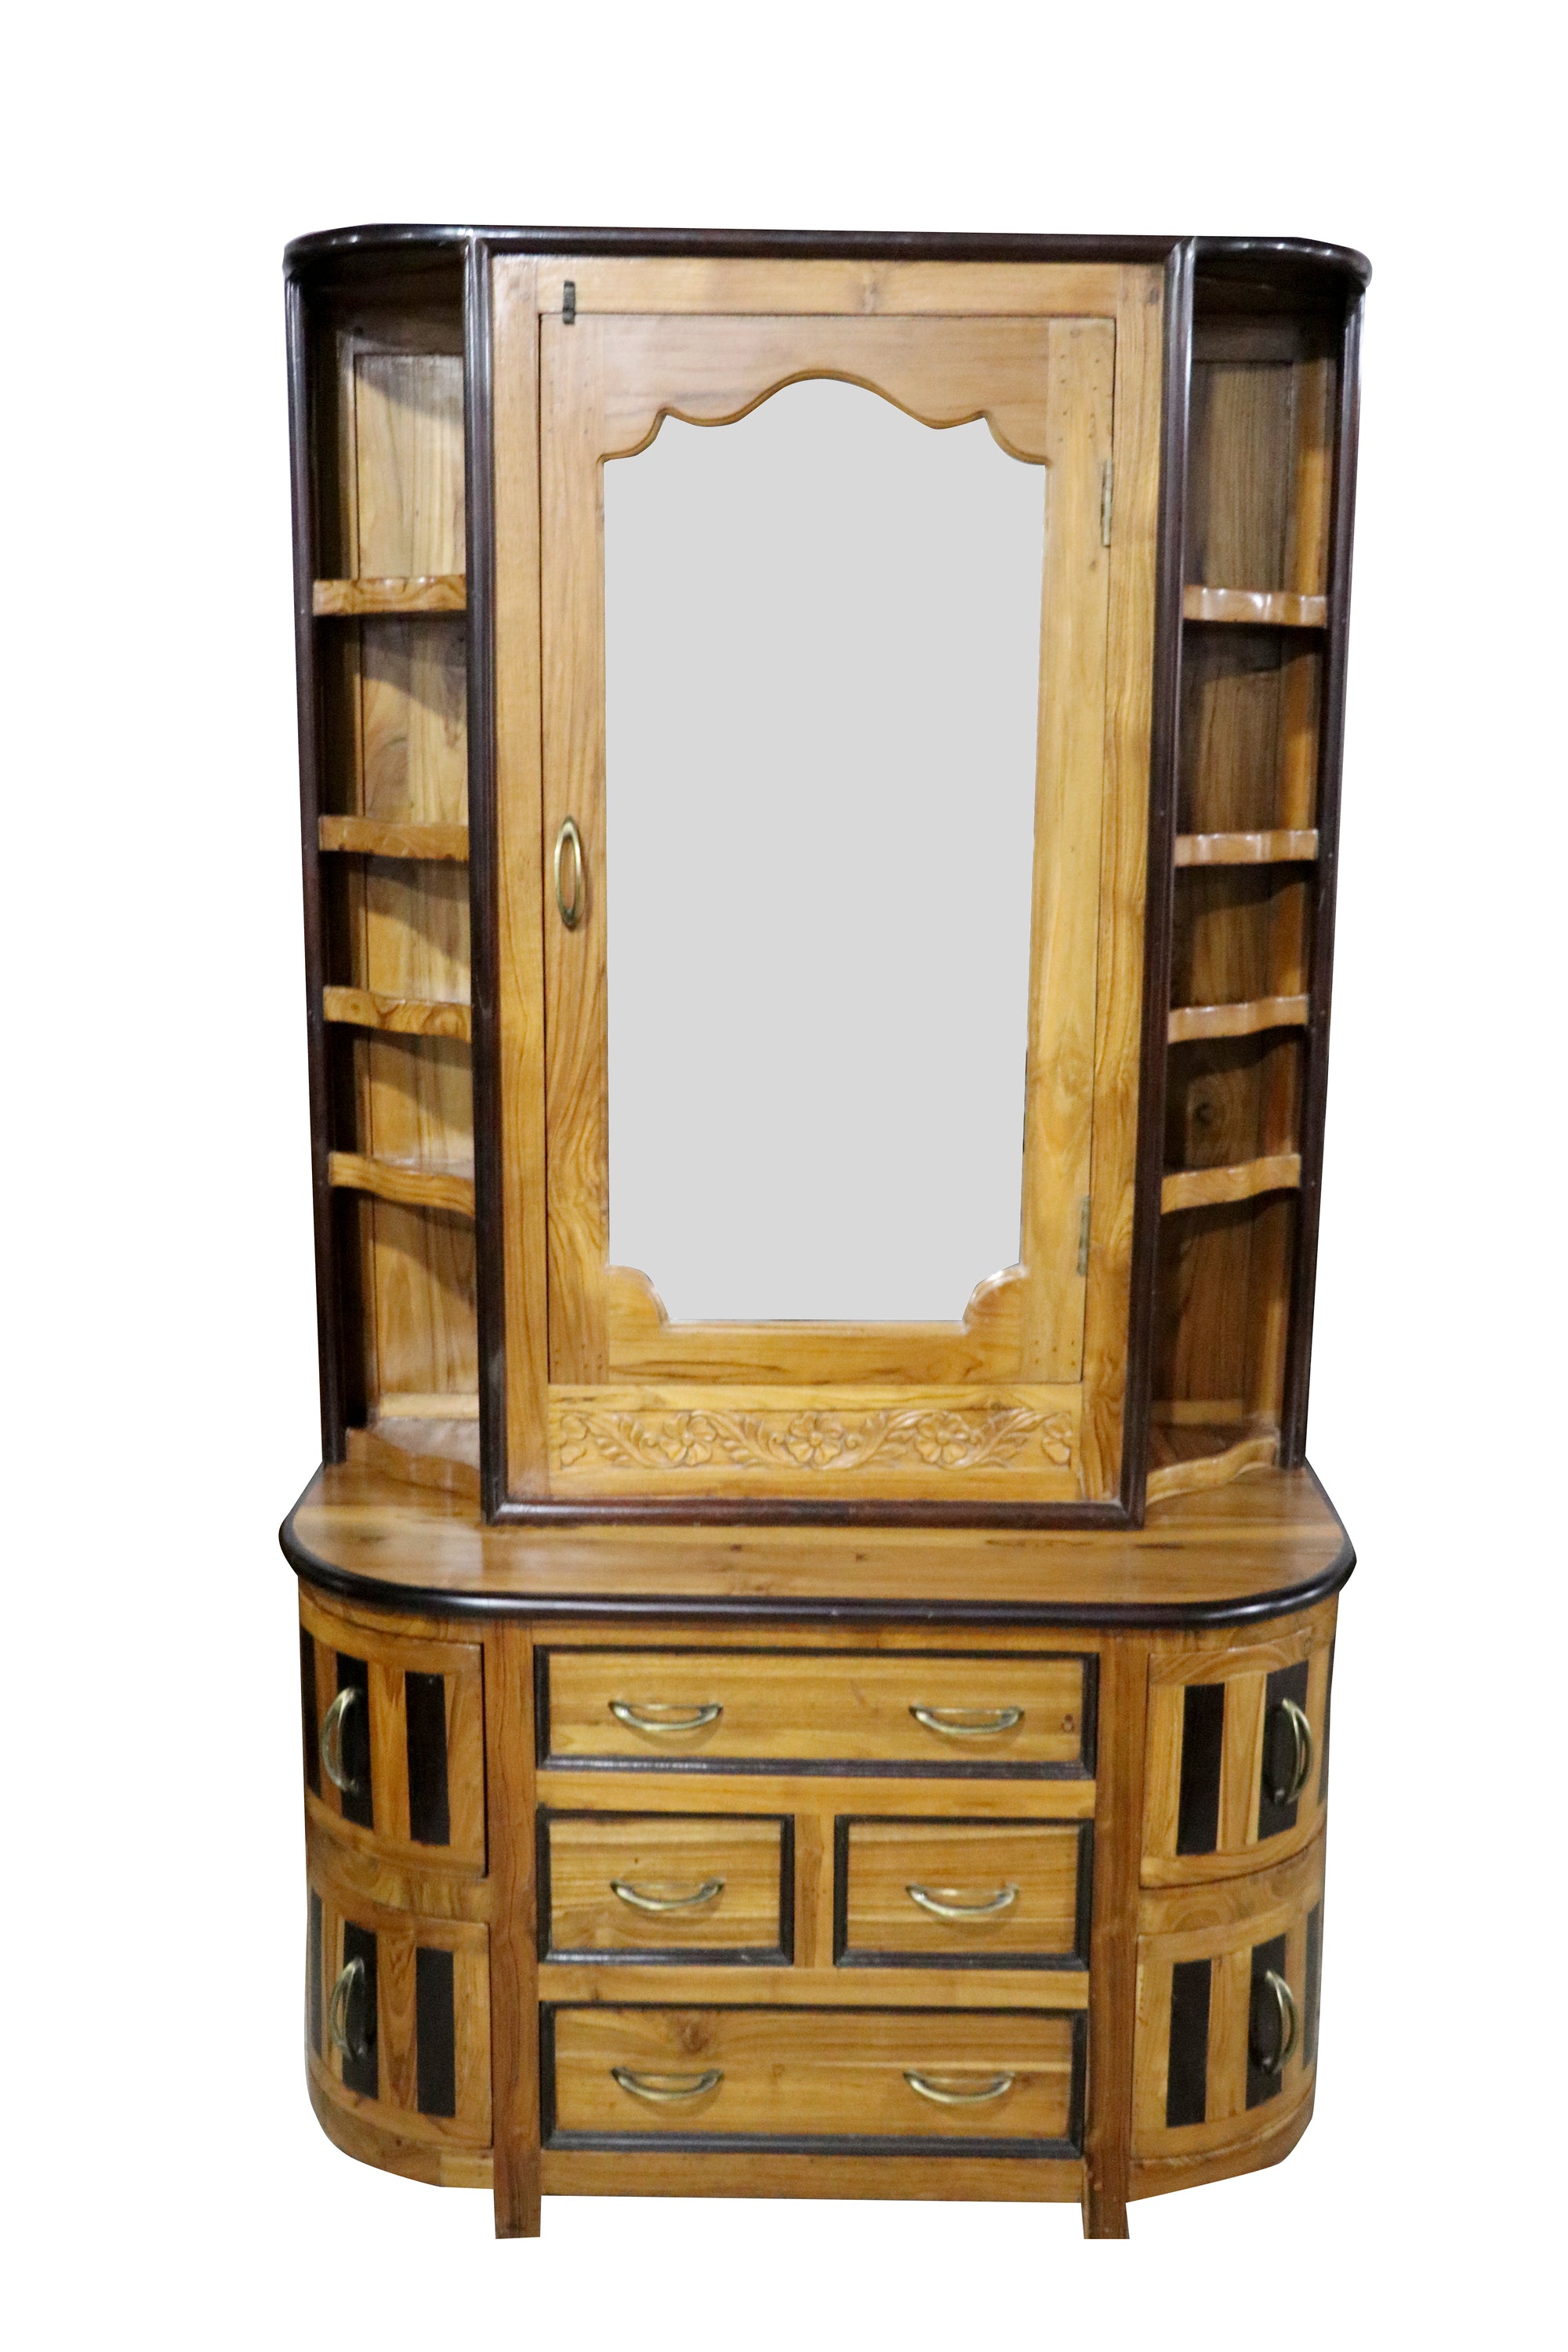 Wooden Dresser (Dressing Table) in Hosur at best price by S CUBE WOOD  Furniture - Justdial